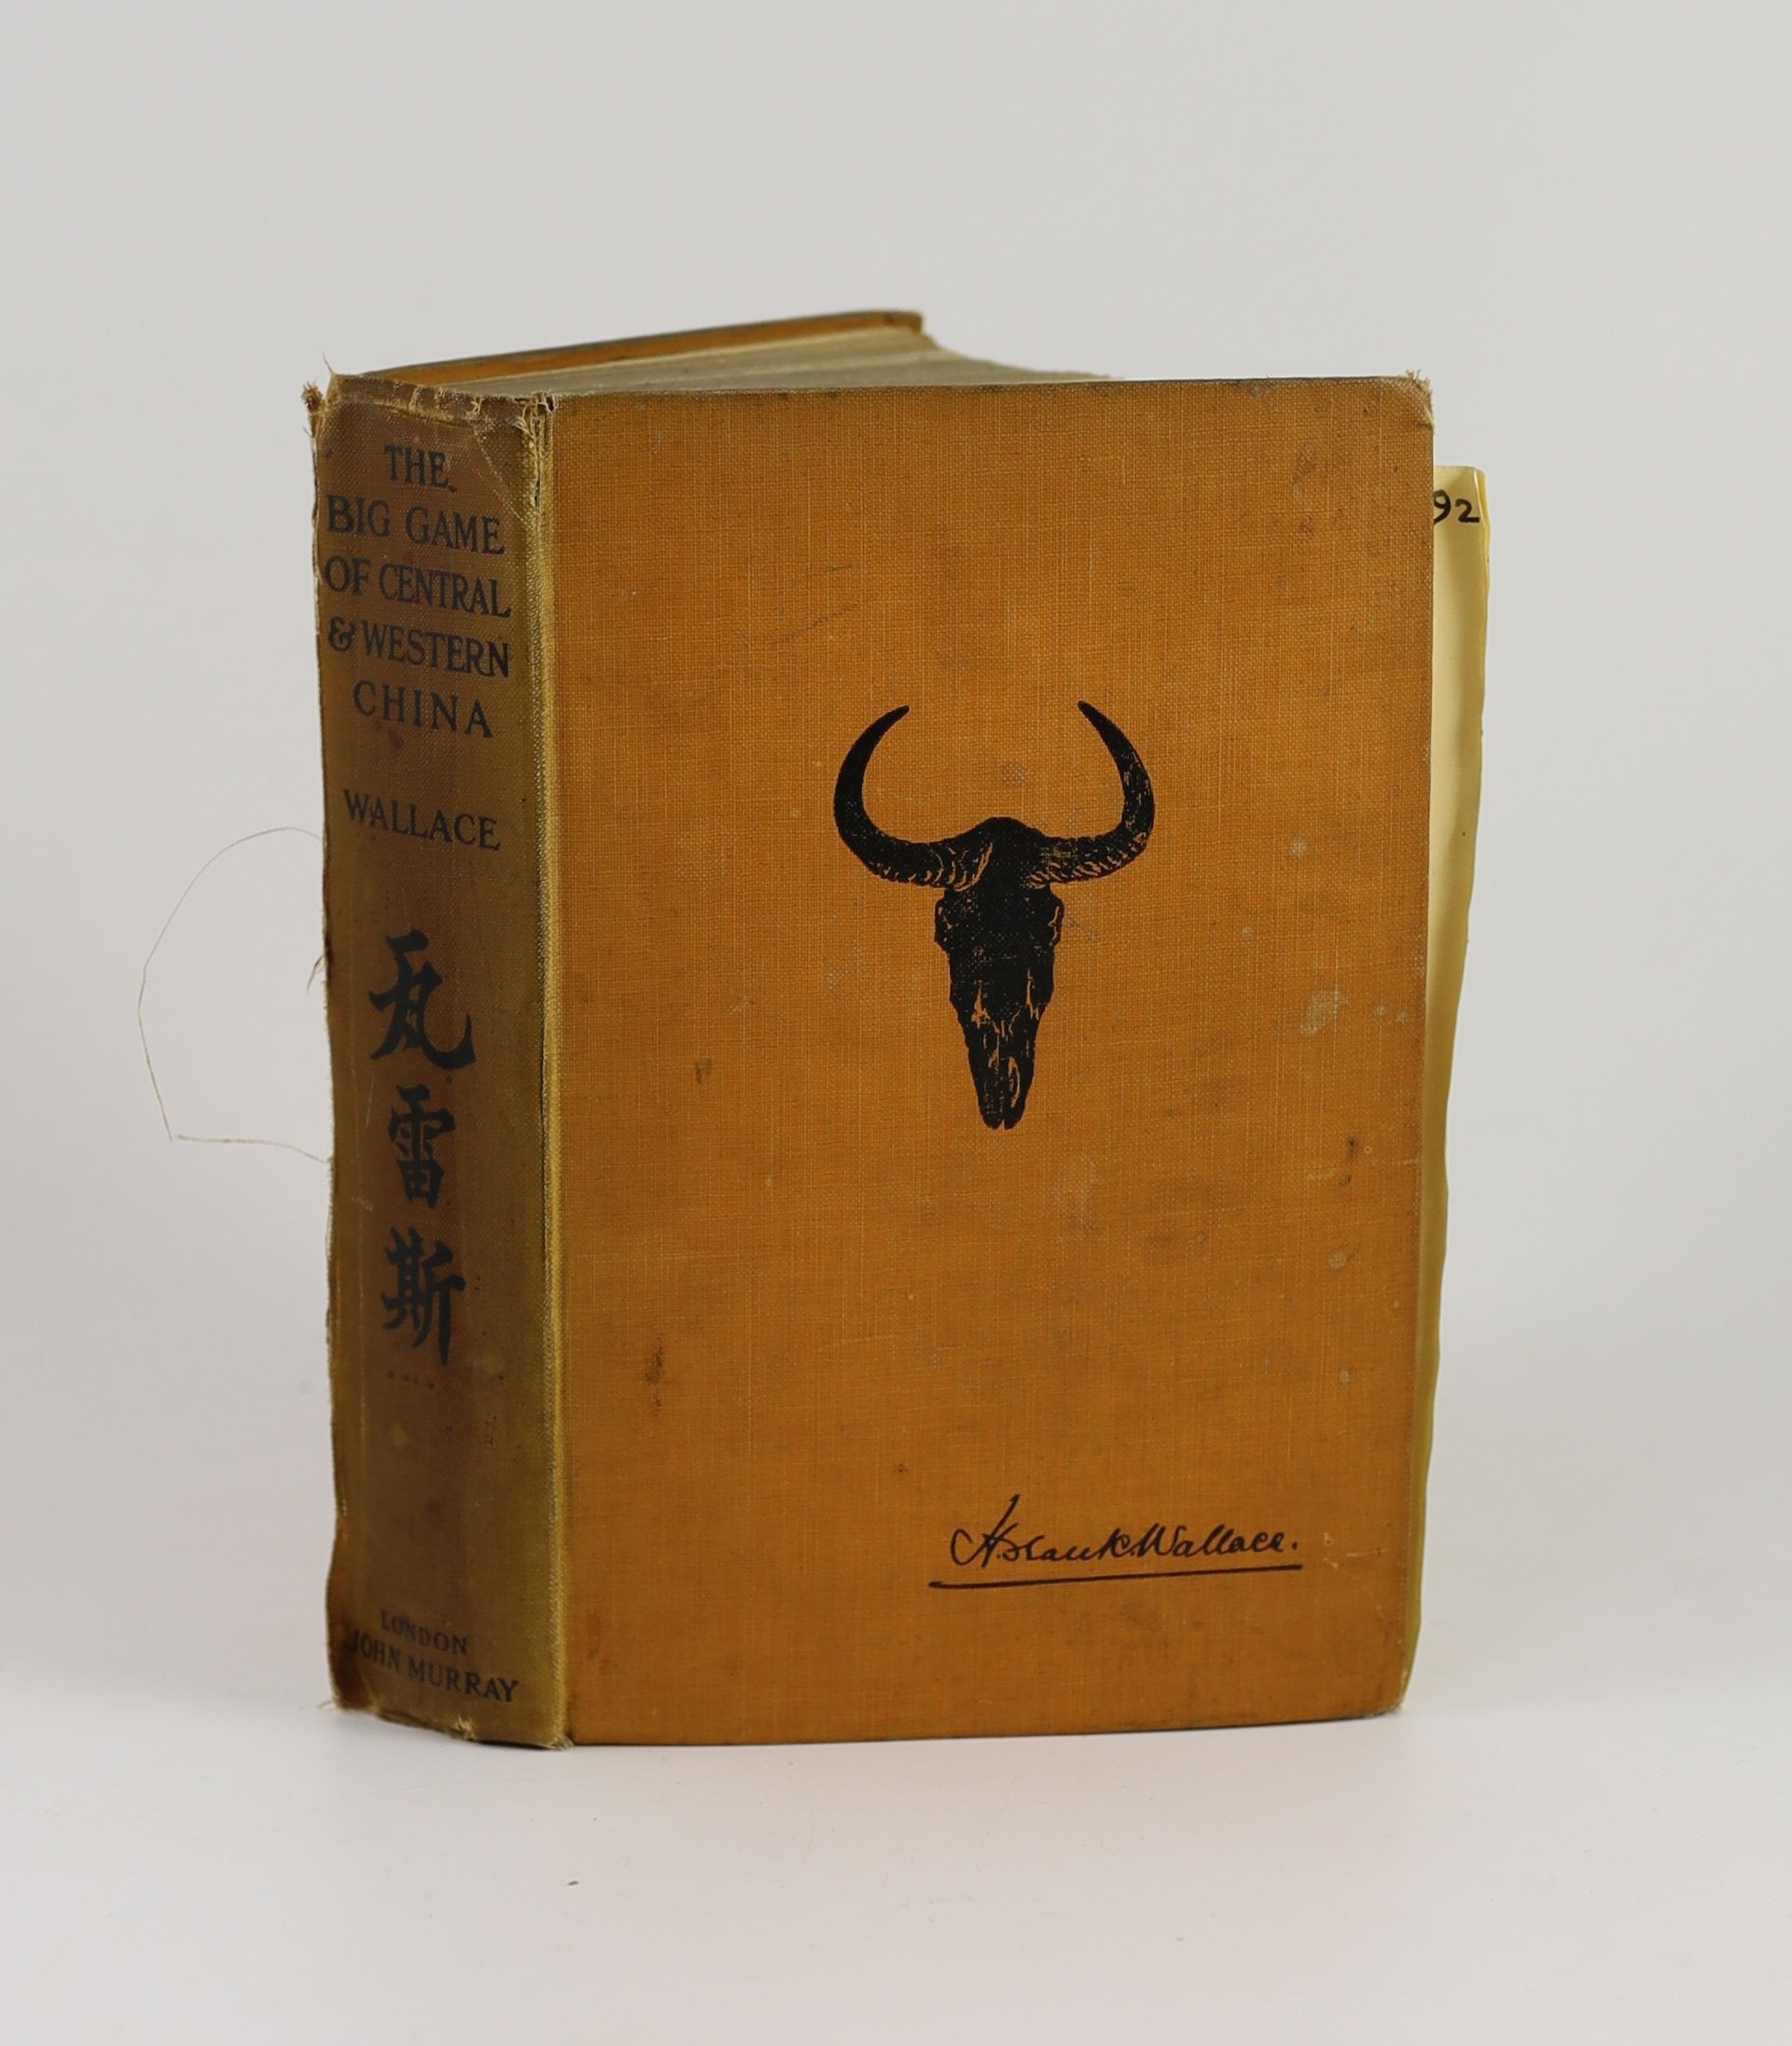 Wallace, Harold Frank. The Big Game of Central and Western China Being an Account of a Journey from Shanghai to London Overland Across the Gobi Desert. London, 1913. Original cloth binding rubbed and worn, the rear spine